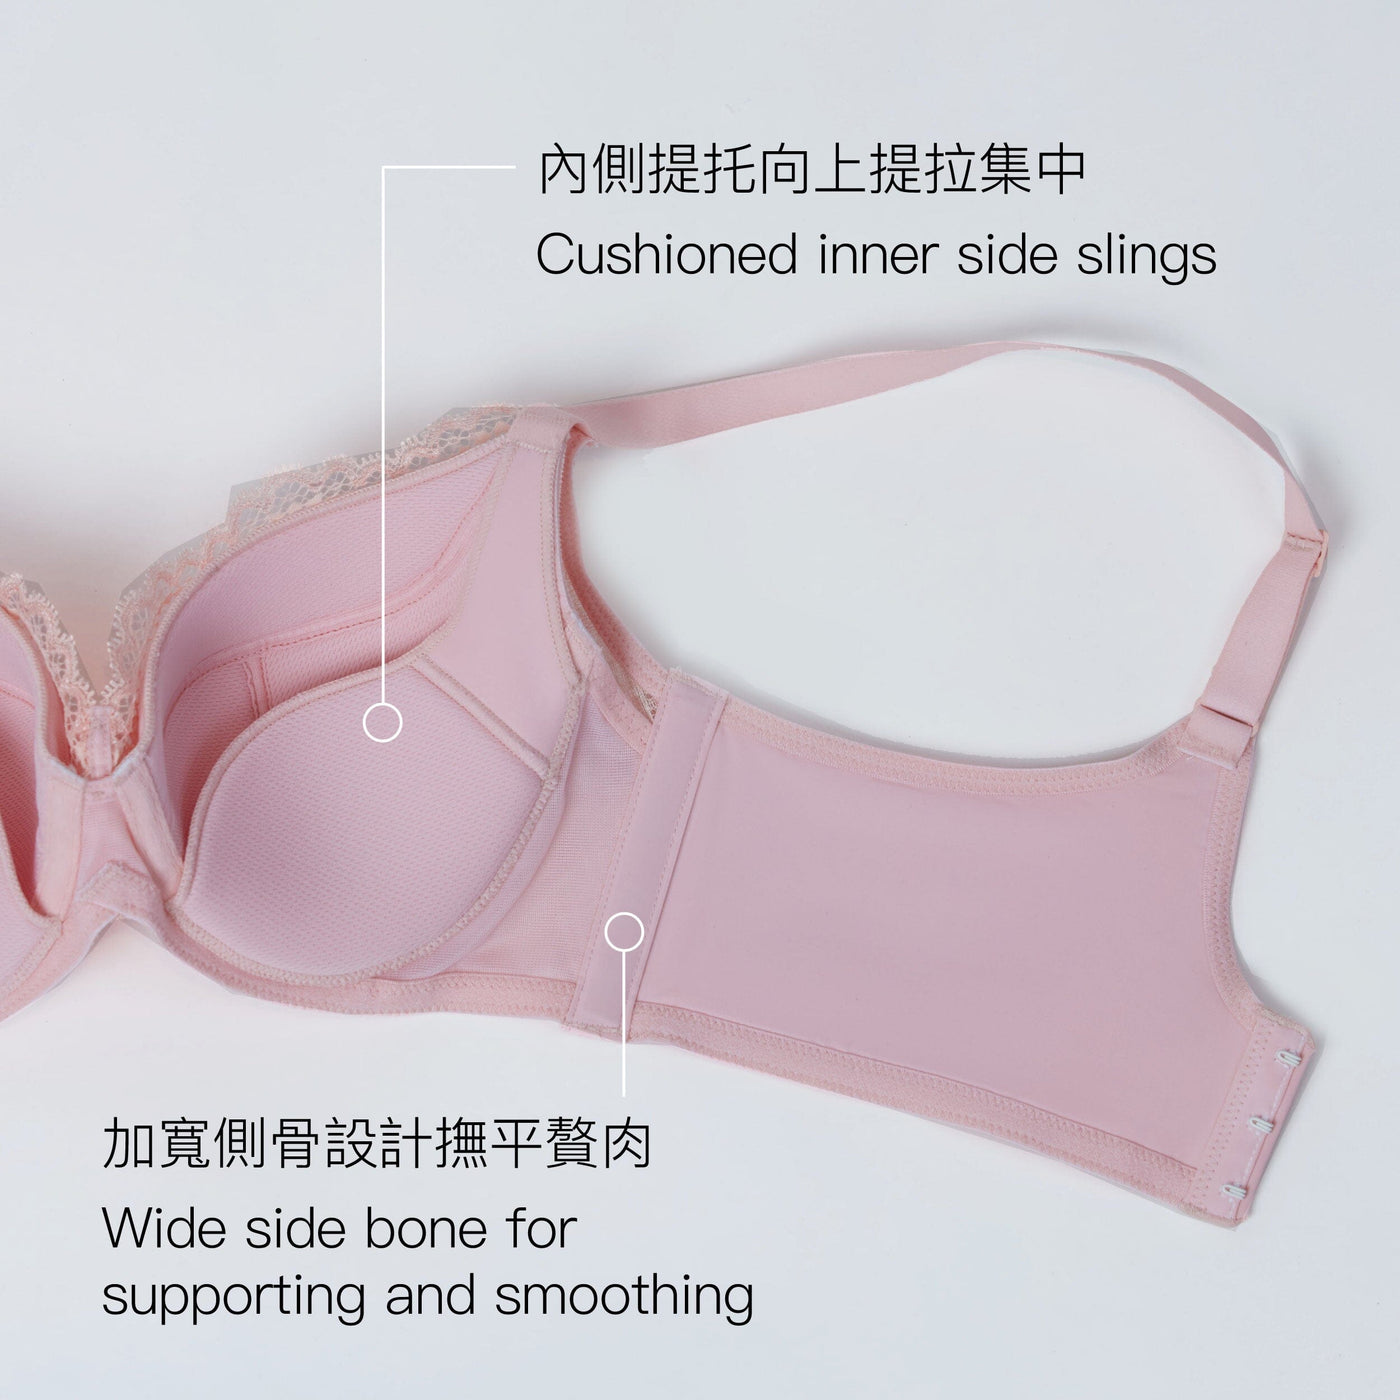 Sustainable REherbafoam™ Slim-cut & Cushioned Sling Push Up Lace Bra Bra Her Own Words Impatiens Pink 70B 